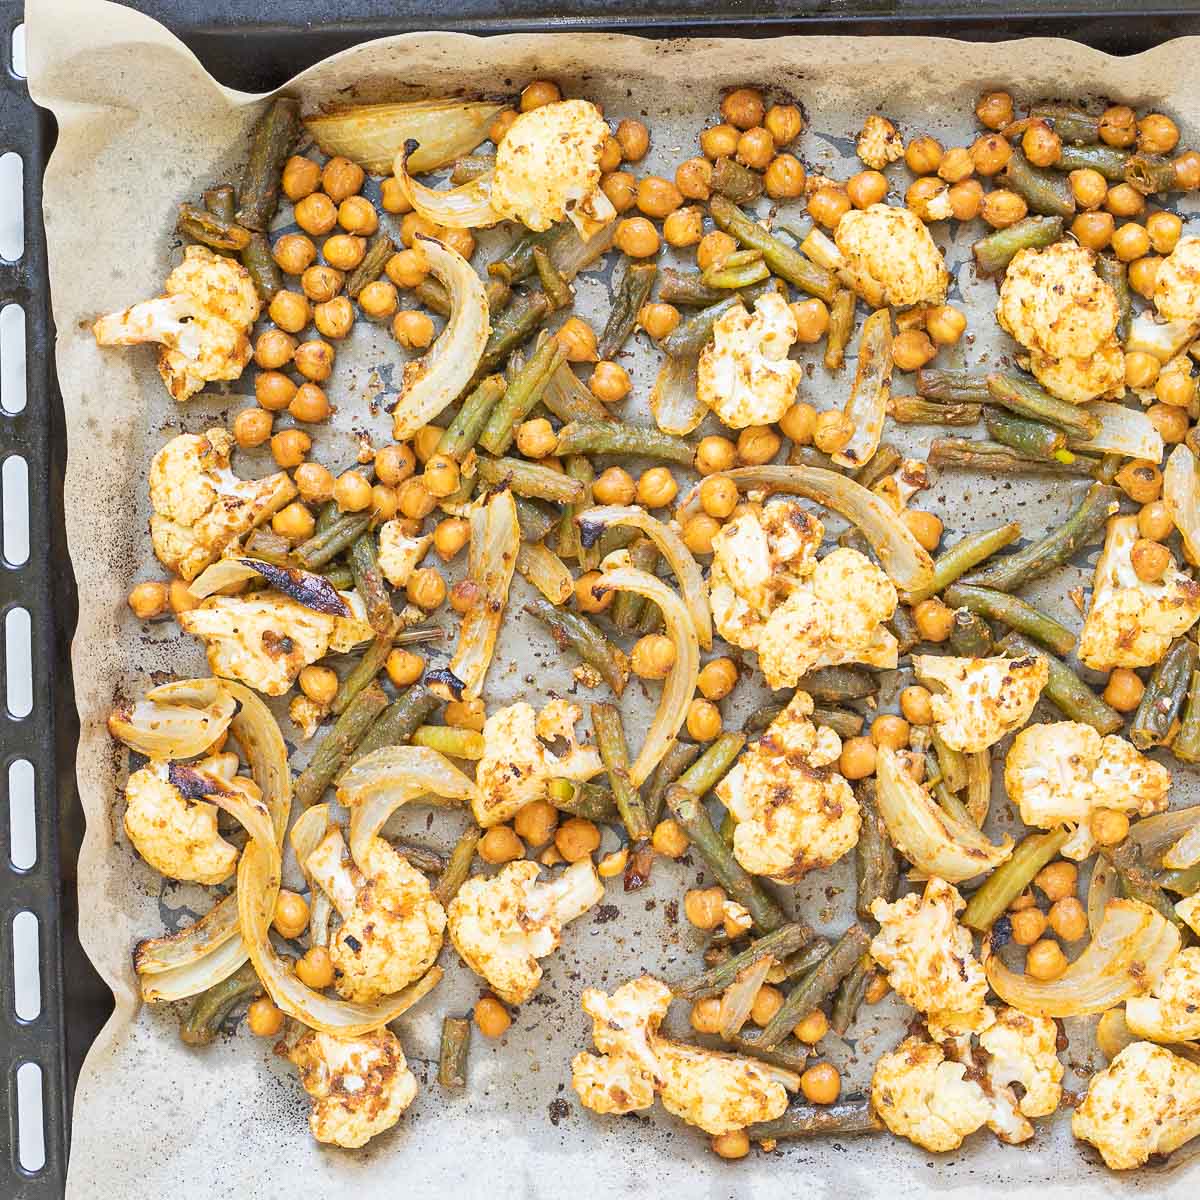 Sheet pan with roasted cauliflower florets, green beans and chickpeas